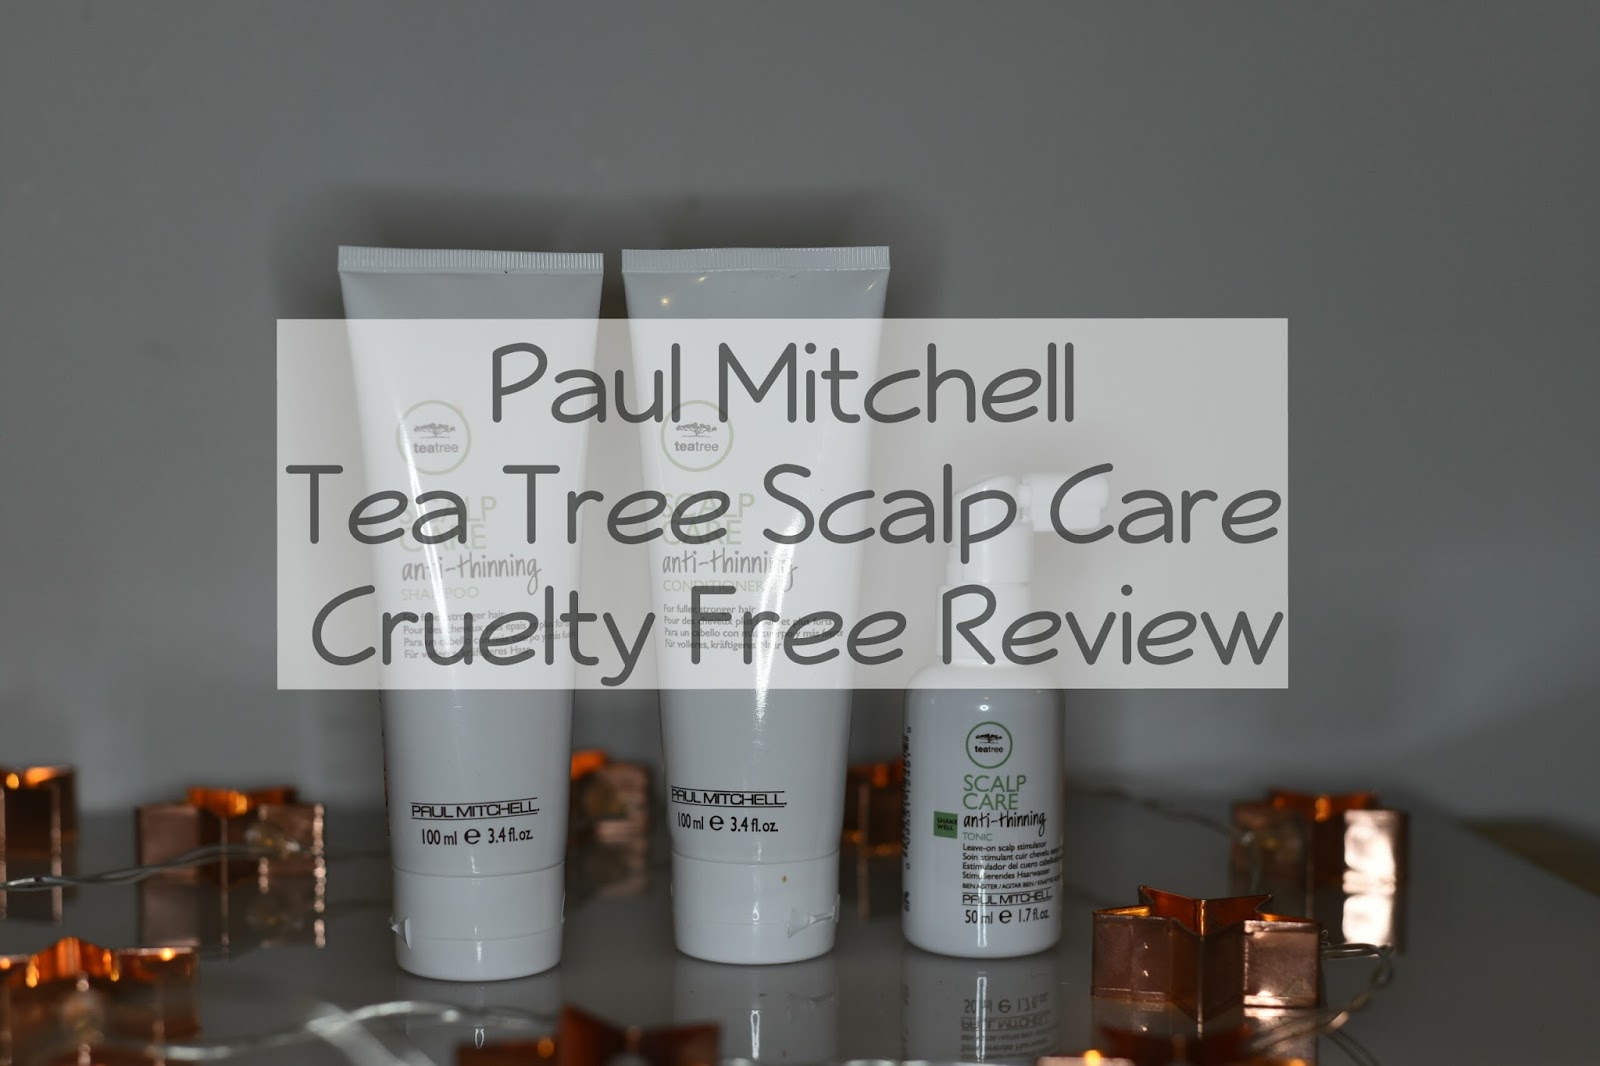 Paul Mitchell Tee Tree Scalp Care Anti-Thinning Shampoo, Conditioner and Tonic Review